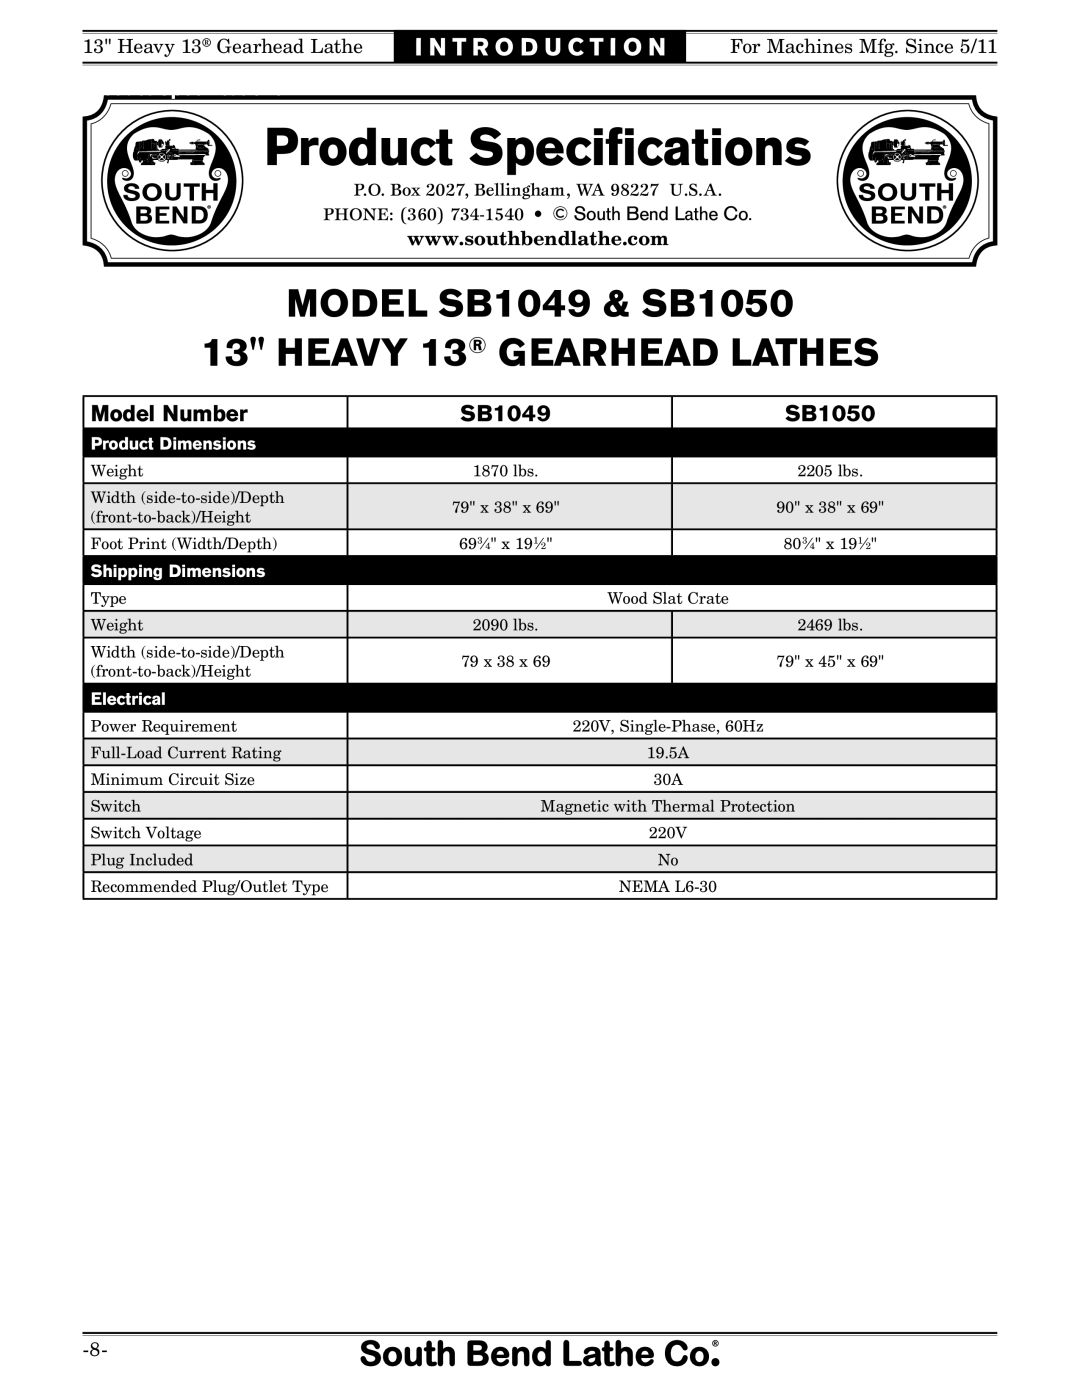 Southbend MODEL SB1049 & SB1050 13 HEAVY 13 GEARHEAD LATHES, Model Number, Product Speciﬁcations, Product Dimensions 